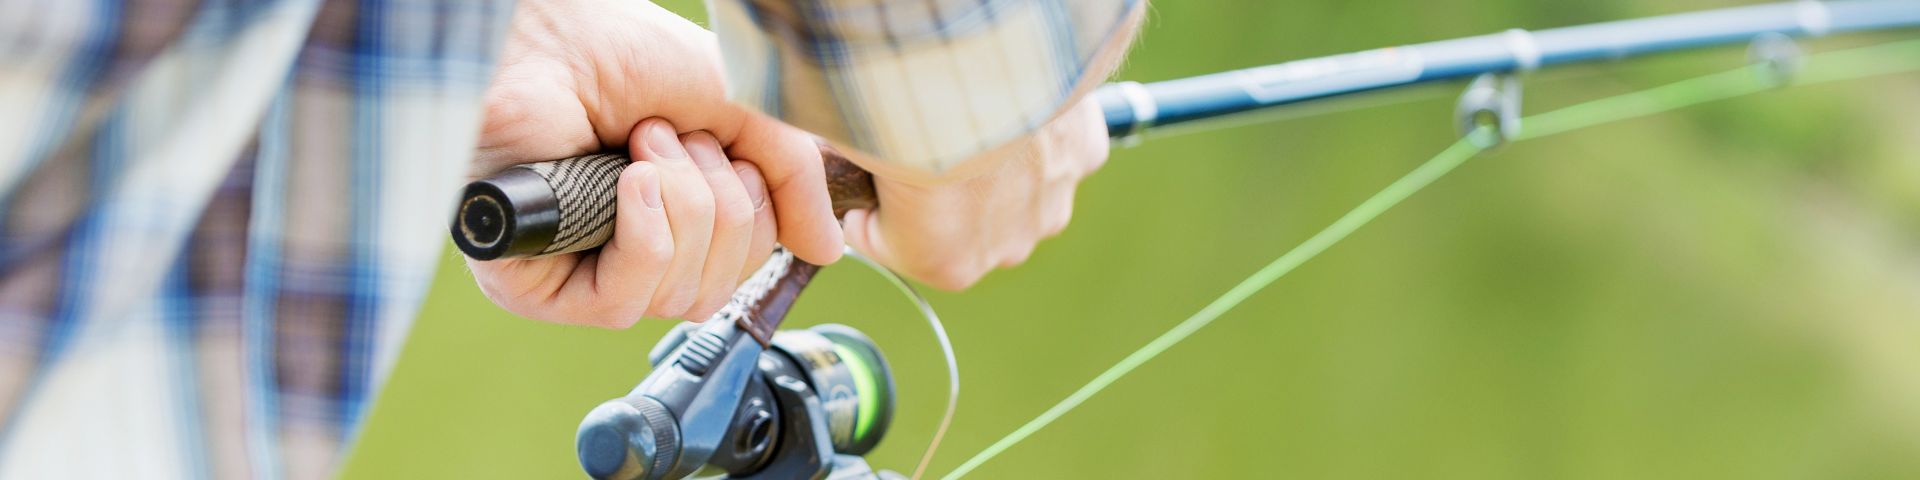 Closeup view of someone holding a fishing rod.